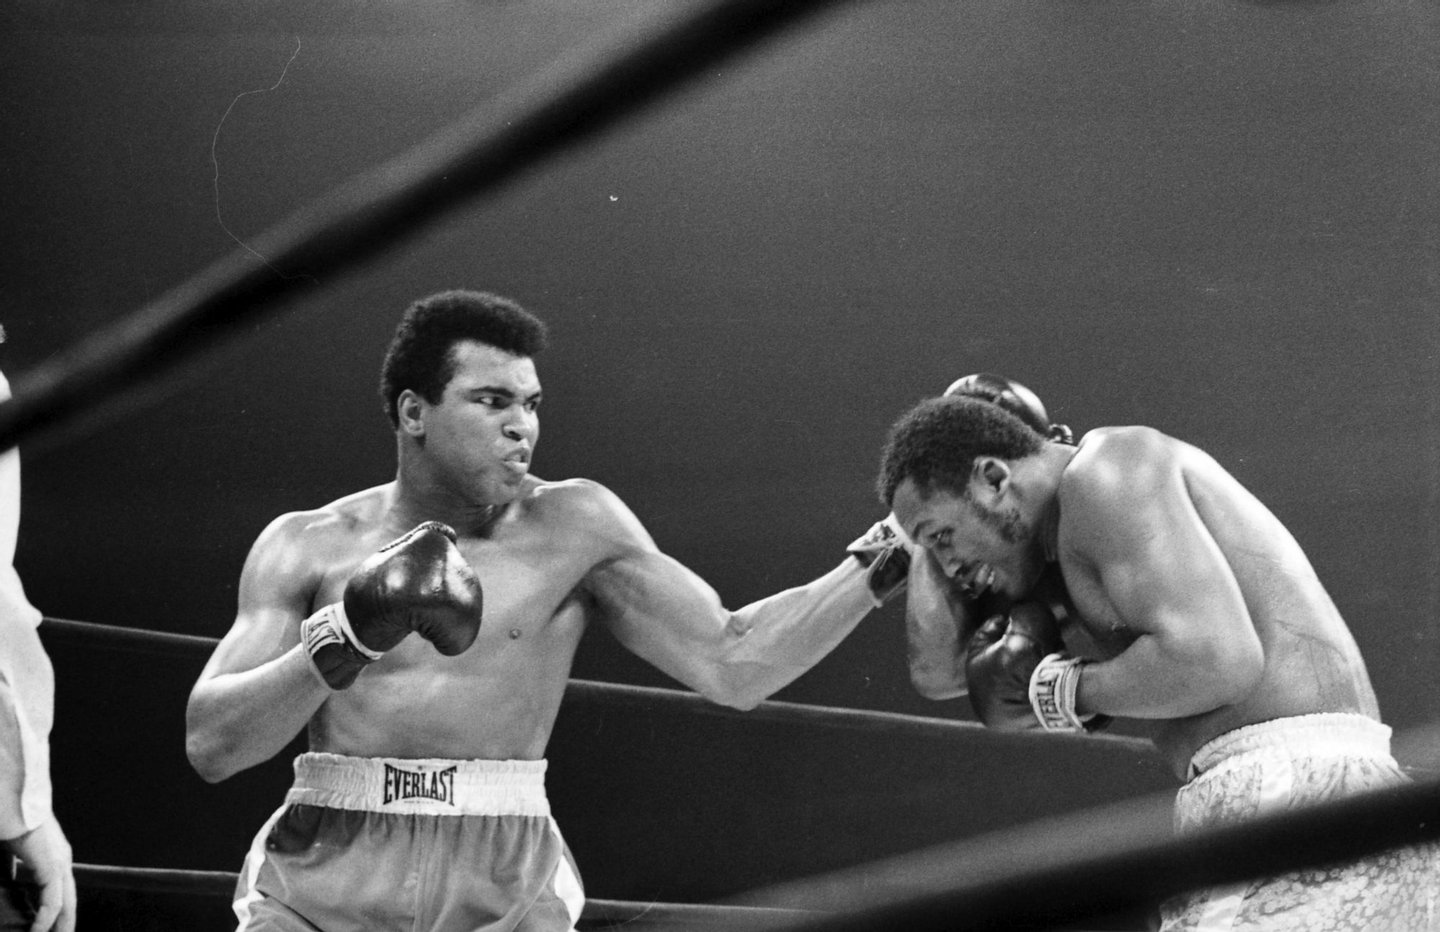 NEW YORK - MARCH 8, 1971: Muhammad Ali lands a left hook to Joe Frazier during a bout at Madison Square Garden on March 8, 1971 in New York, New York. (Photo by: The Ring Magazine/Getty Images)